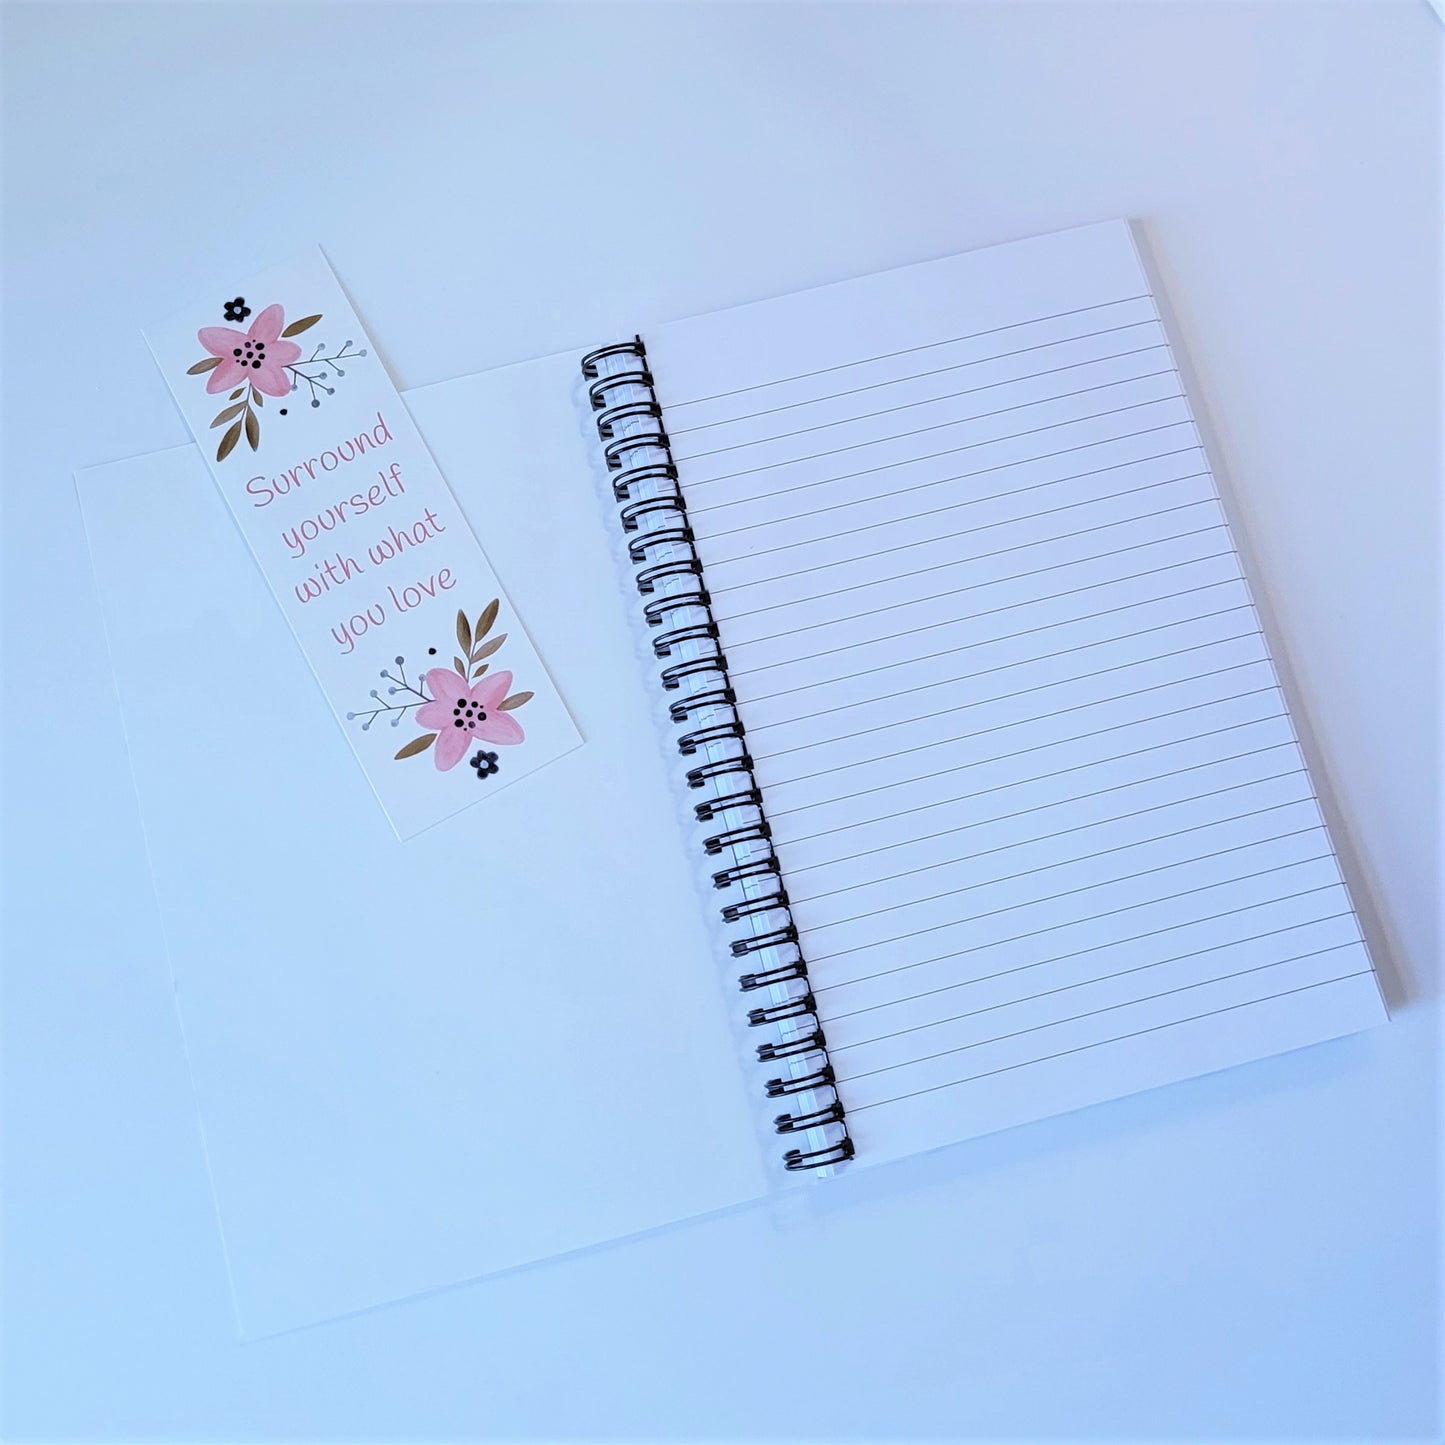 Our exclusive notebook designed in-house has a cute floral print in pinks, tans, and navy blue. The cover reads "Surround yourself with what you love" in a fun pink font. The floral design also decorates the back cover with the words "be a blessing... today, tomorrow, always". Picture shows inside lined paper with matching bookmark FREE with purchase of notebook. | oak7west.com